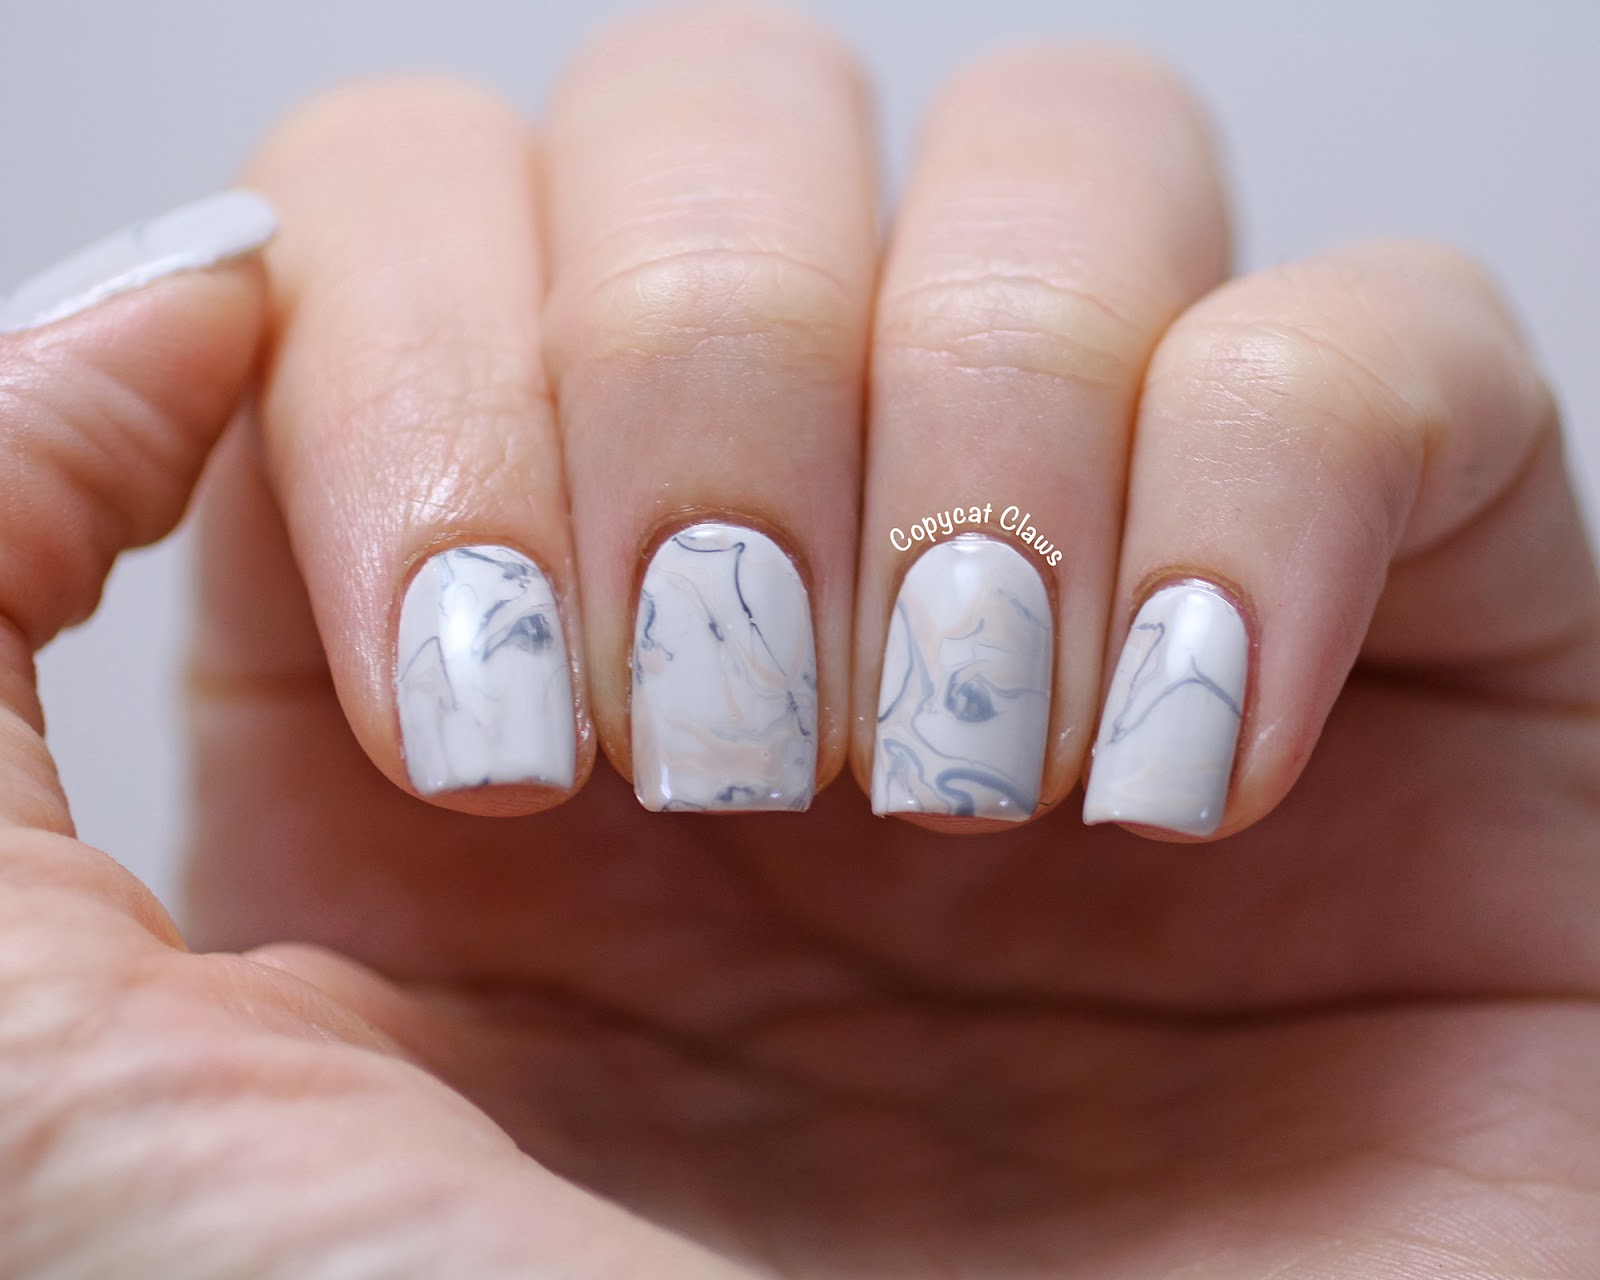 Marble Nail Art Tutorial Without Water - wide 8